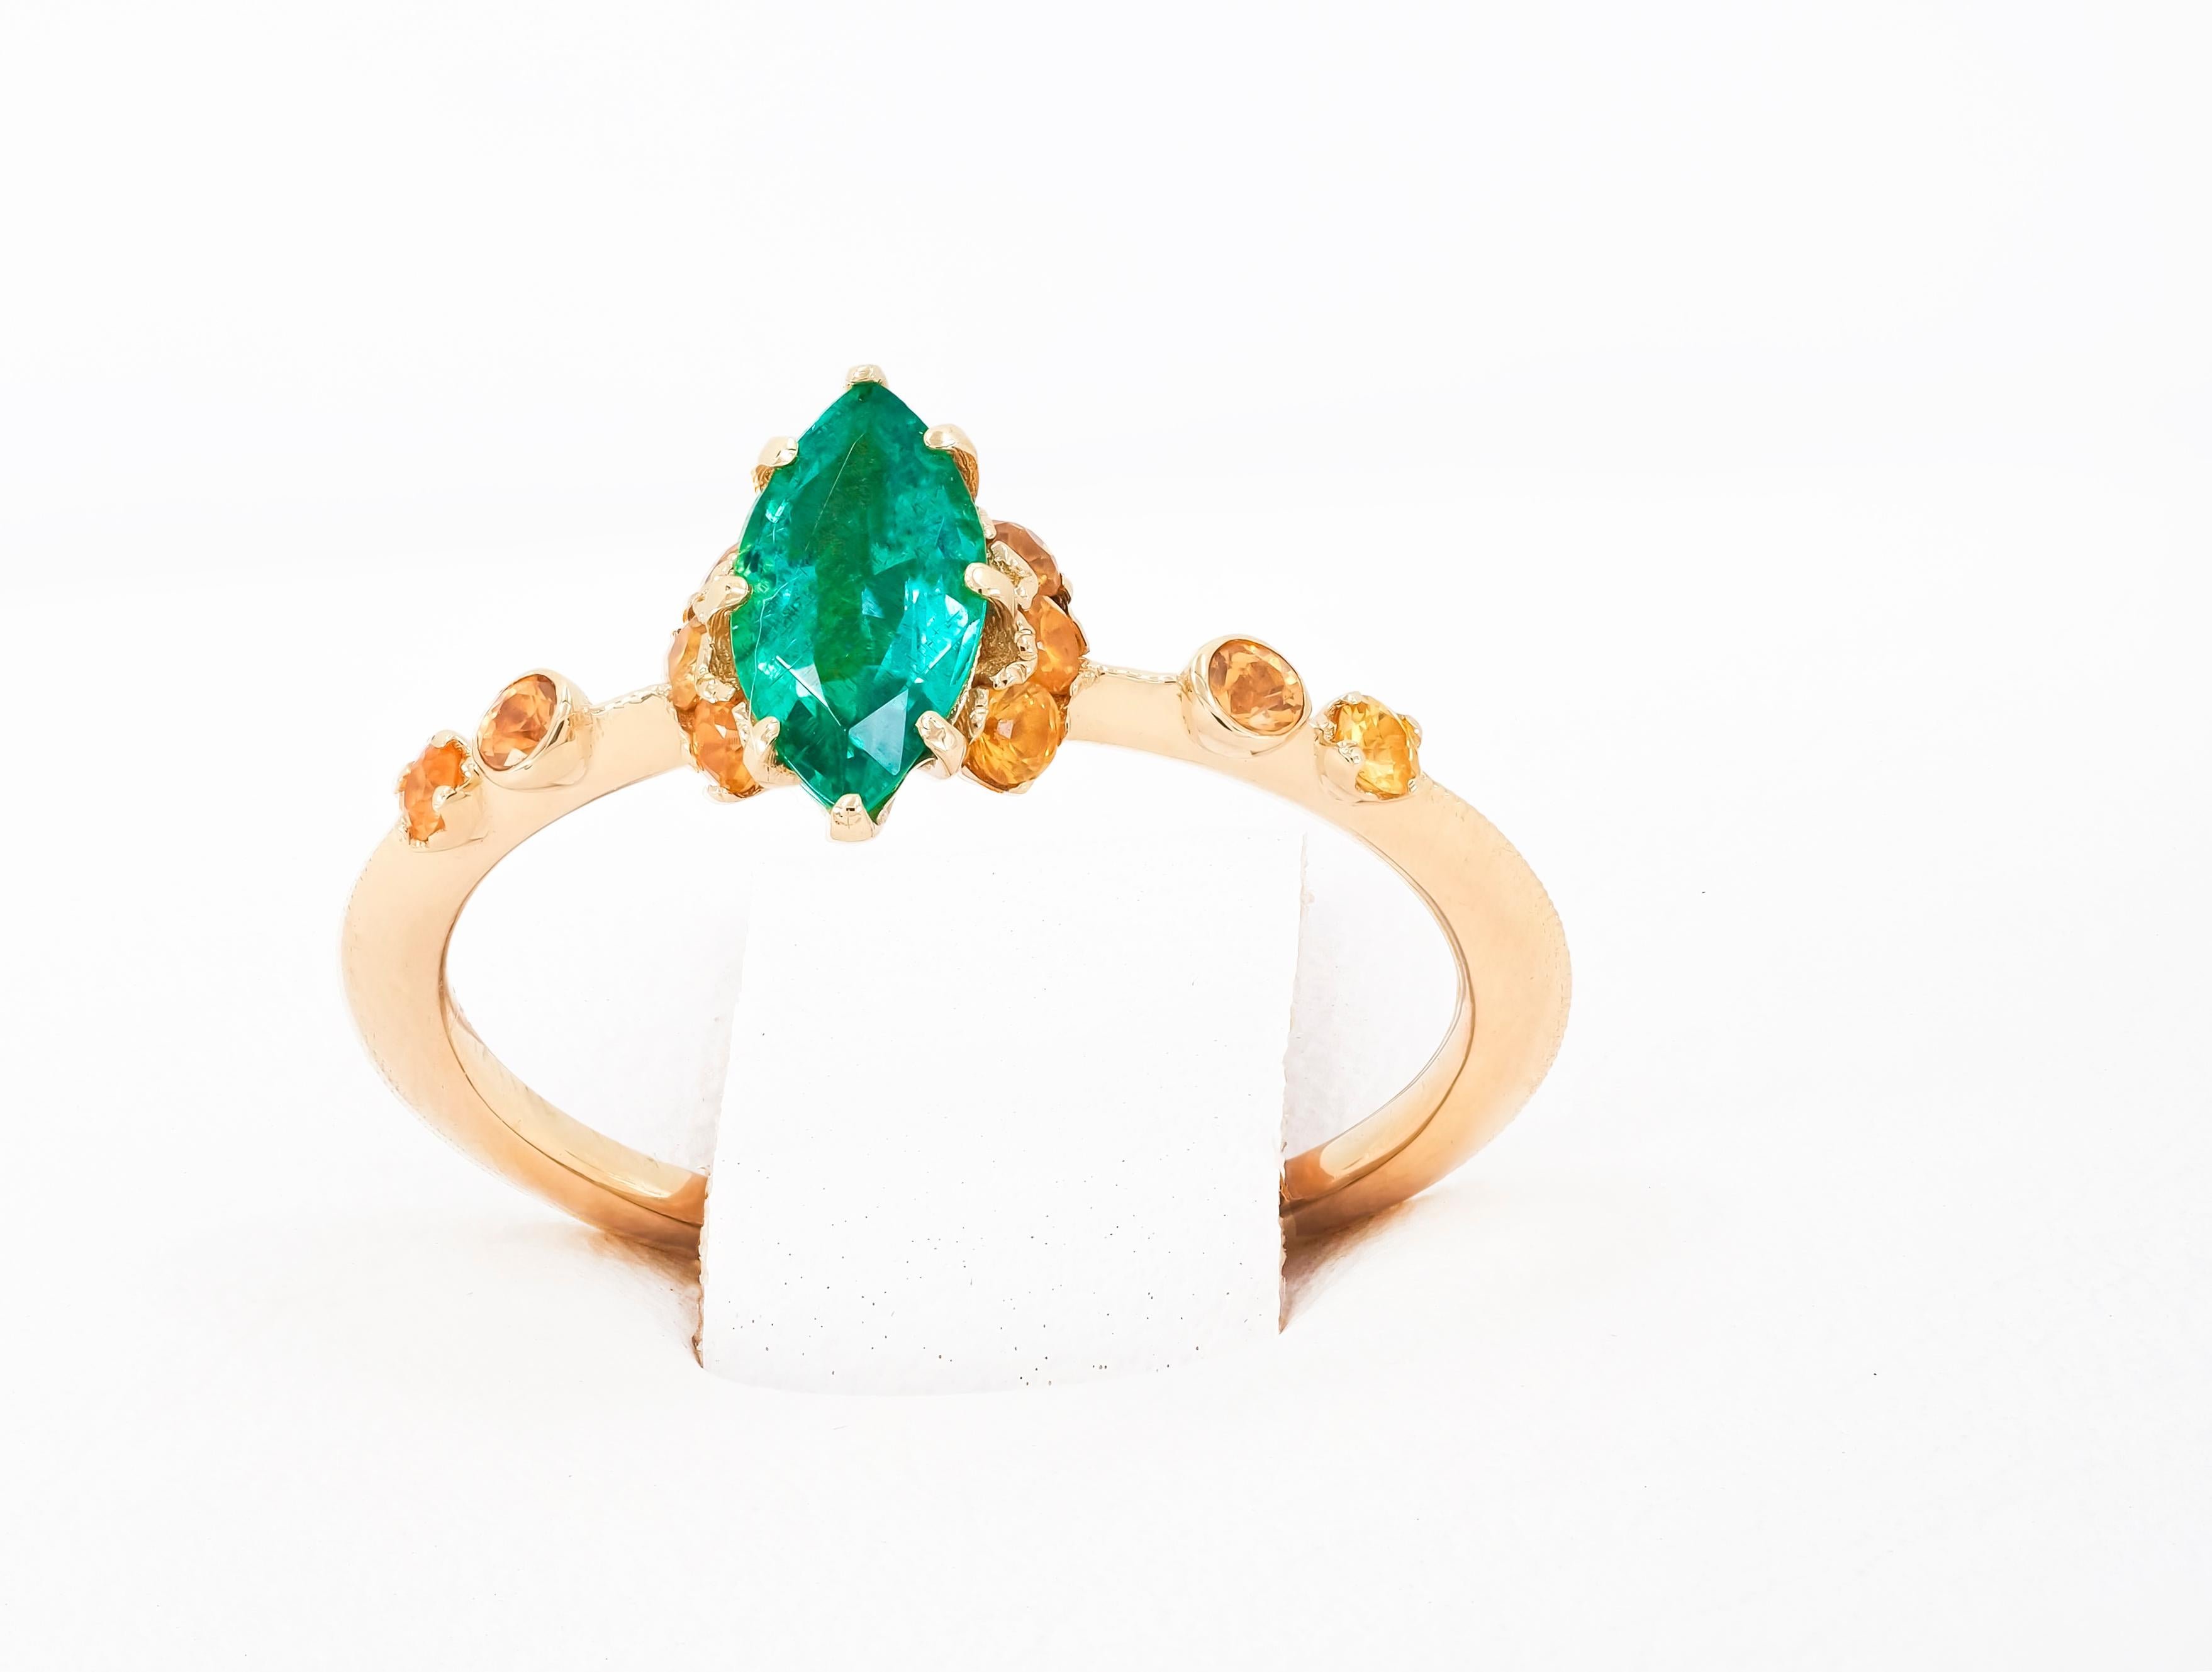 14 karat gold ring with genuine emerald and sapphires.
Metal: 14 karat gold
Weight: 1.65 g. 
Central stone: Genuine emerald
Color: Green  
Marquise cut, weight - 0.70 ct in total.
Clarity: Transparent with inclusions 
Surrounding stones:
Genuine